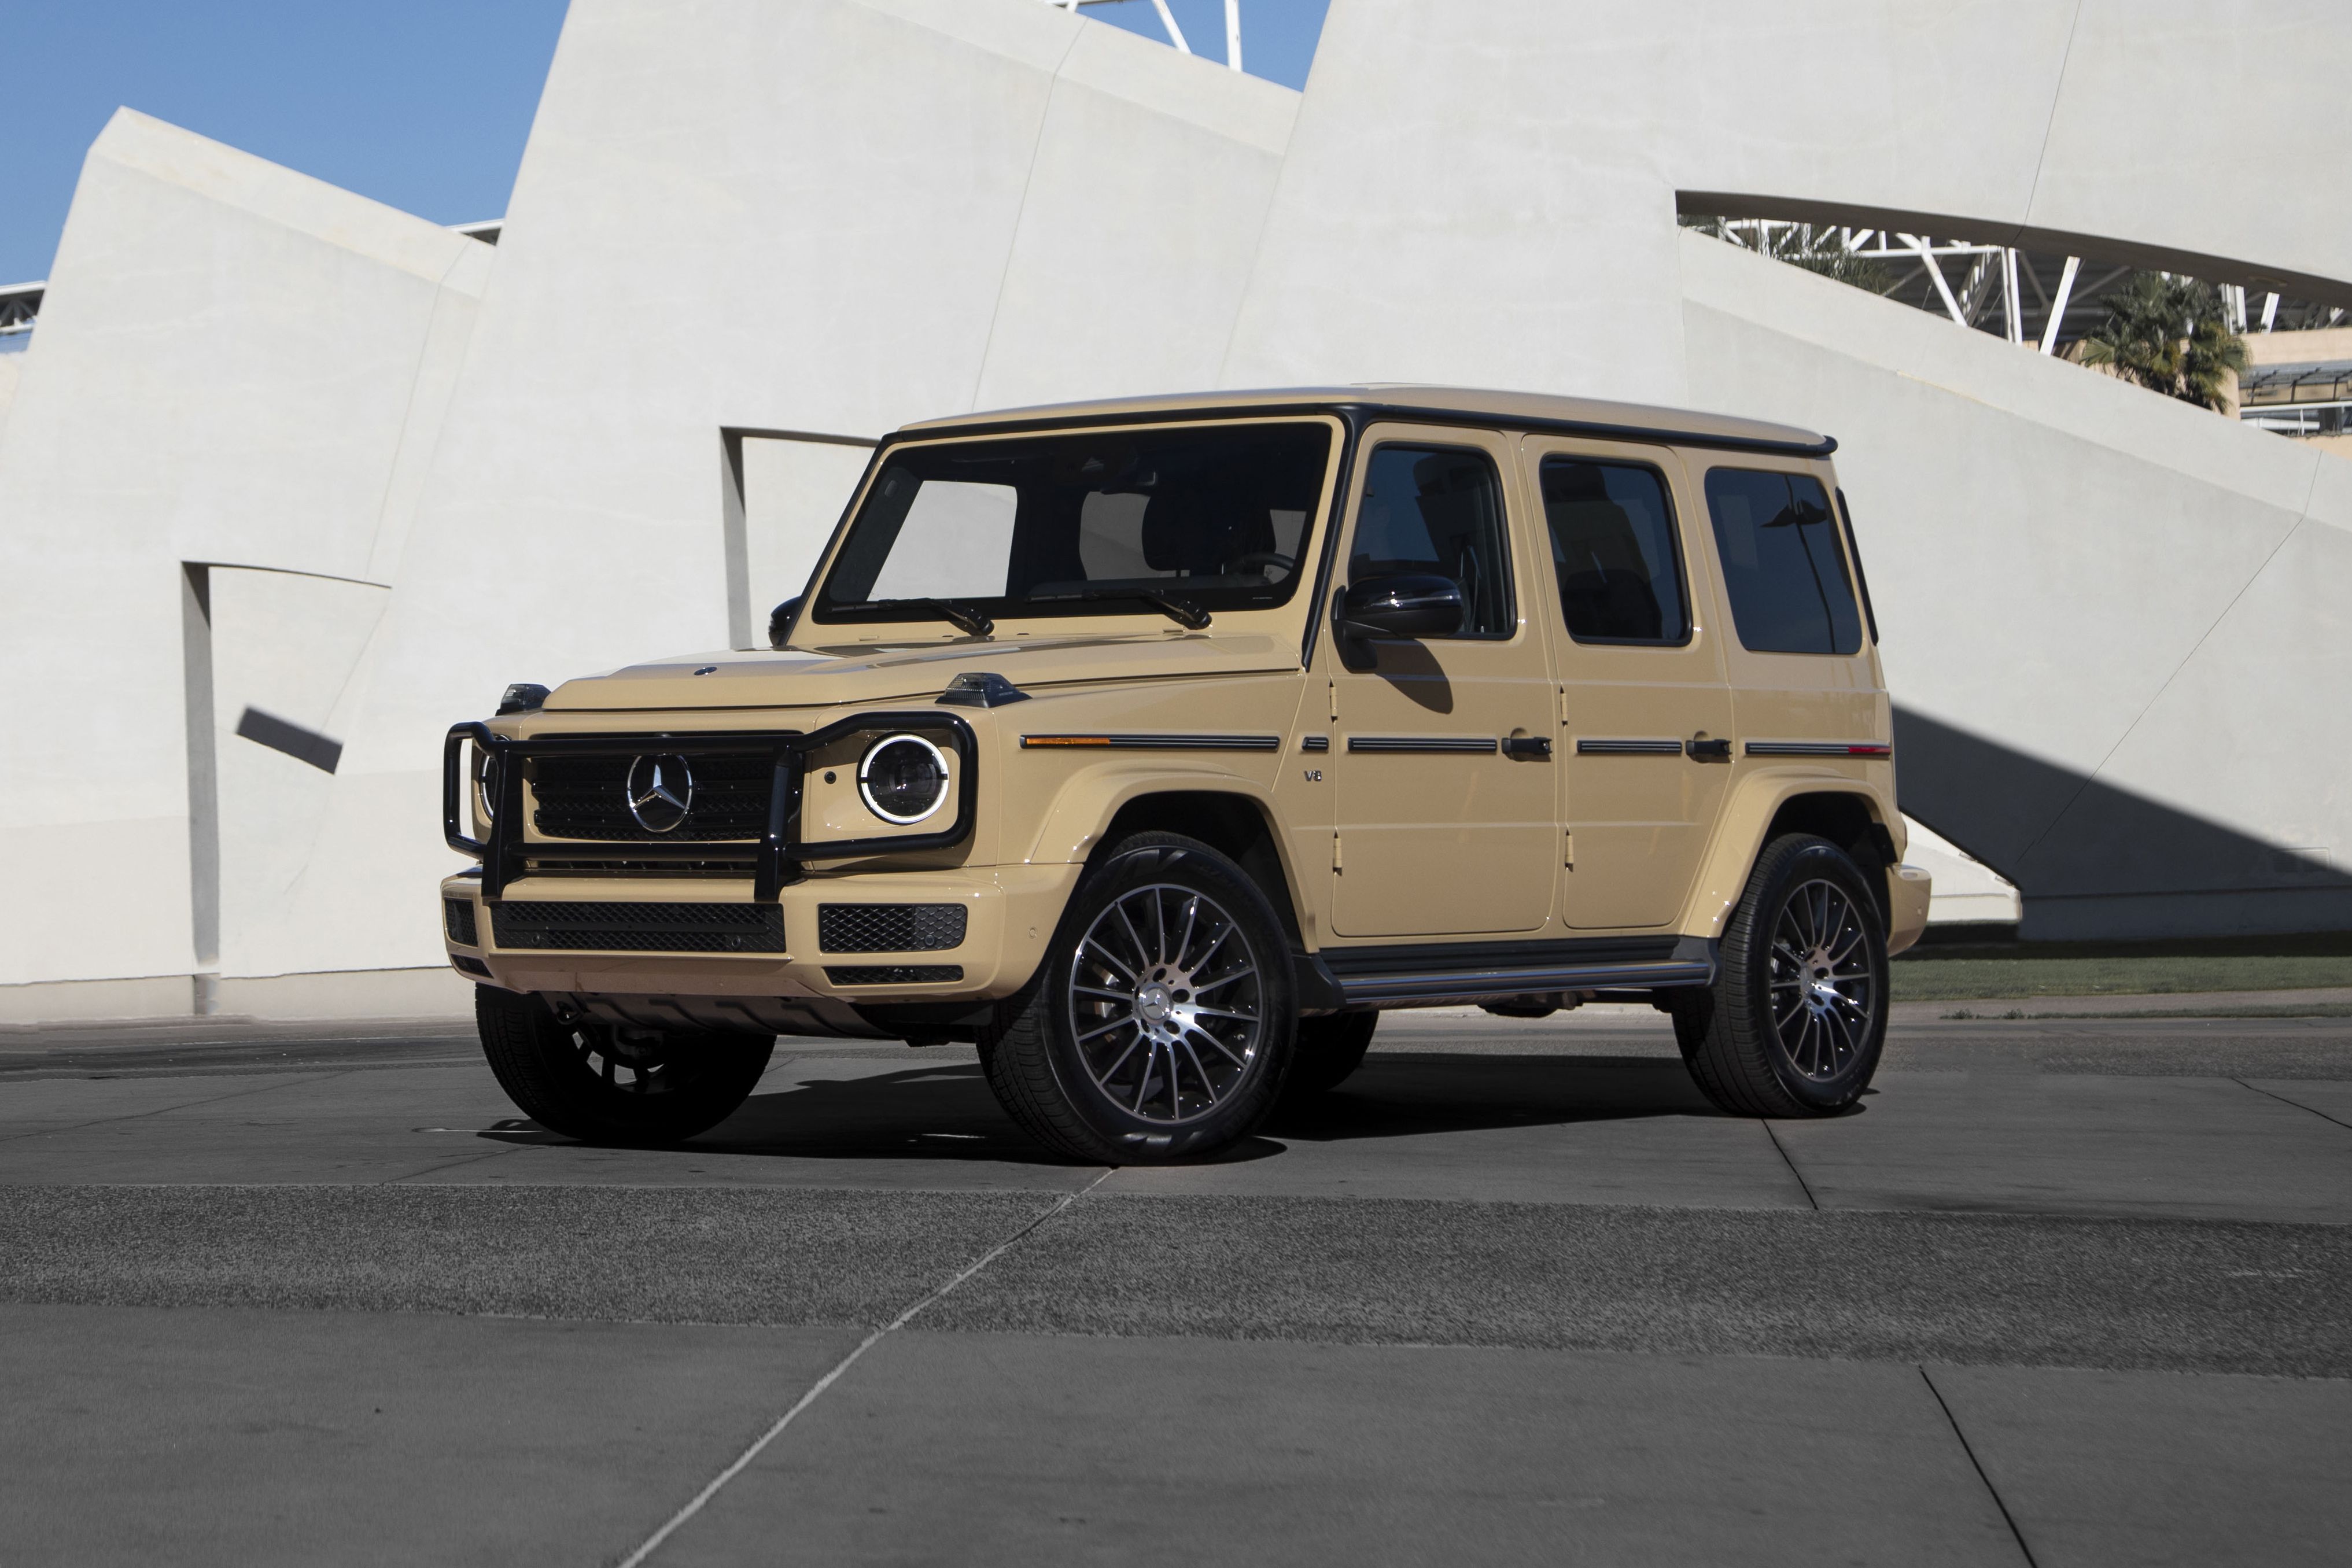 Mercedes Benz G Class Review, Pricing, And Specs